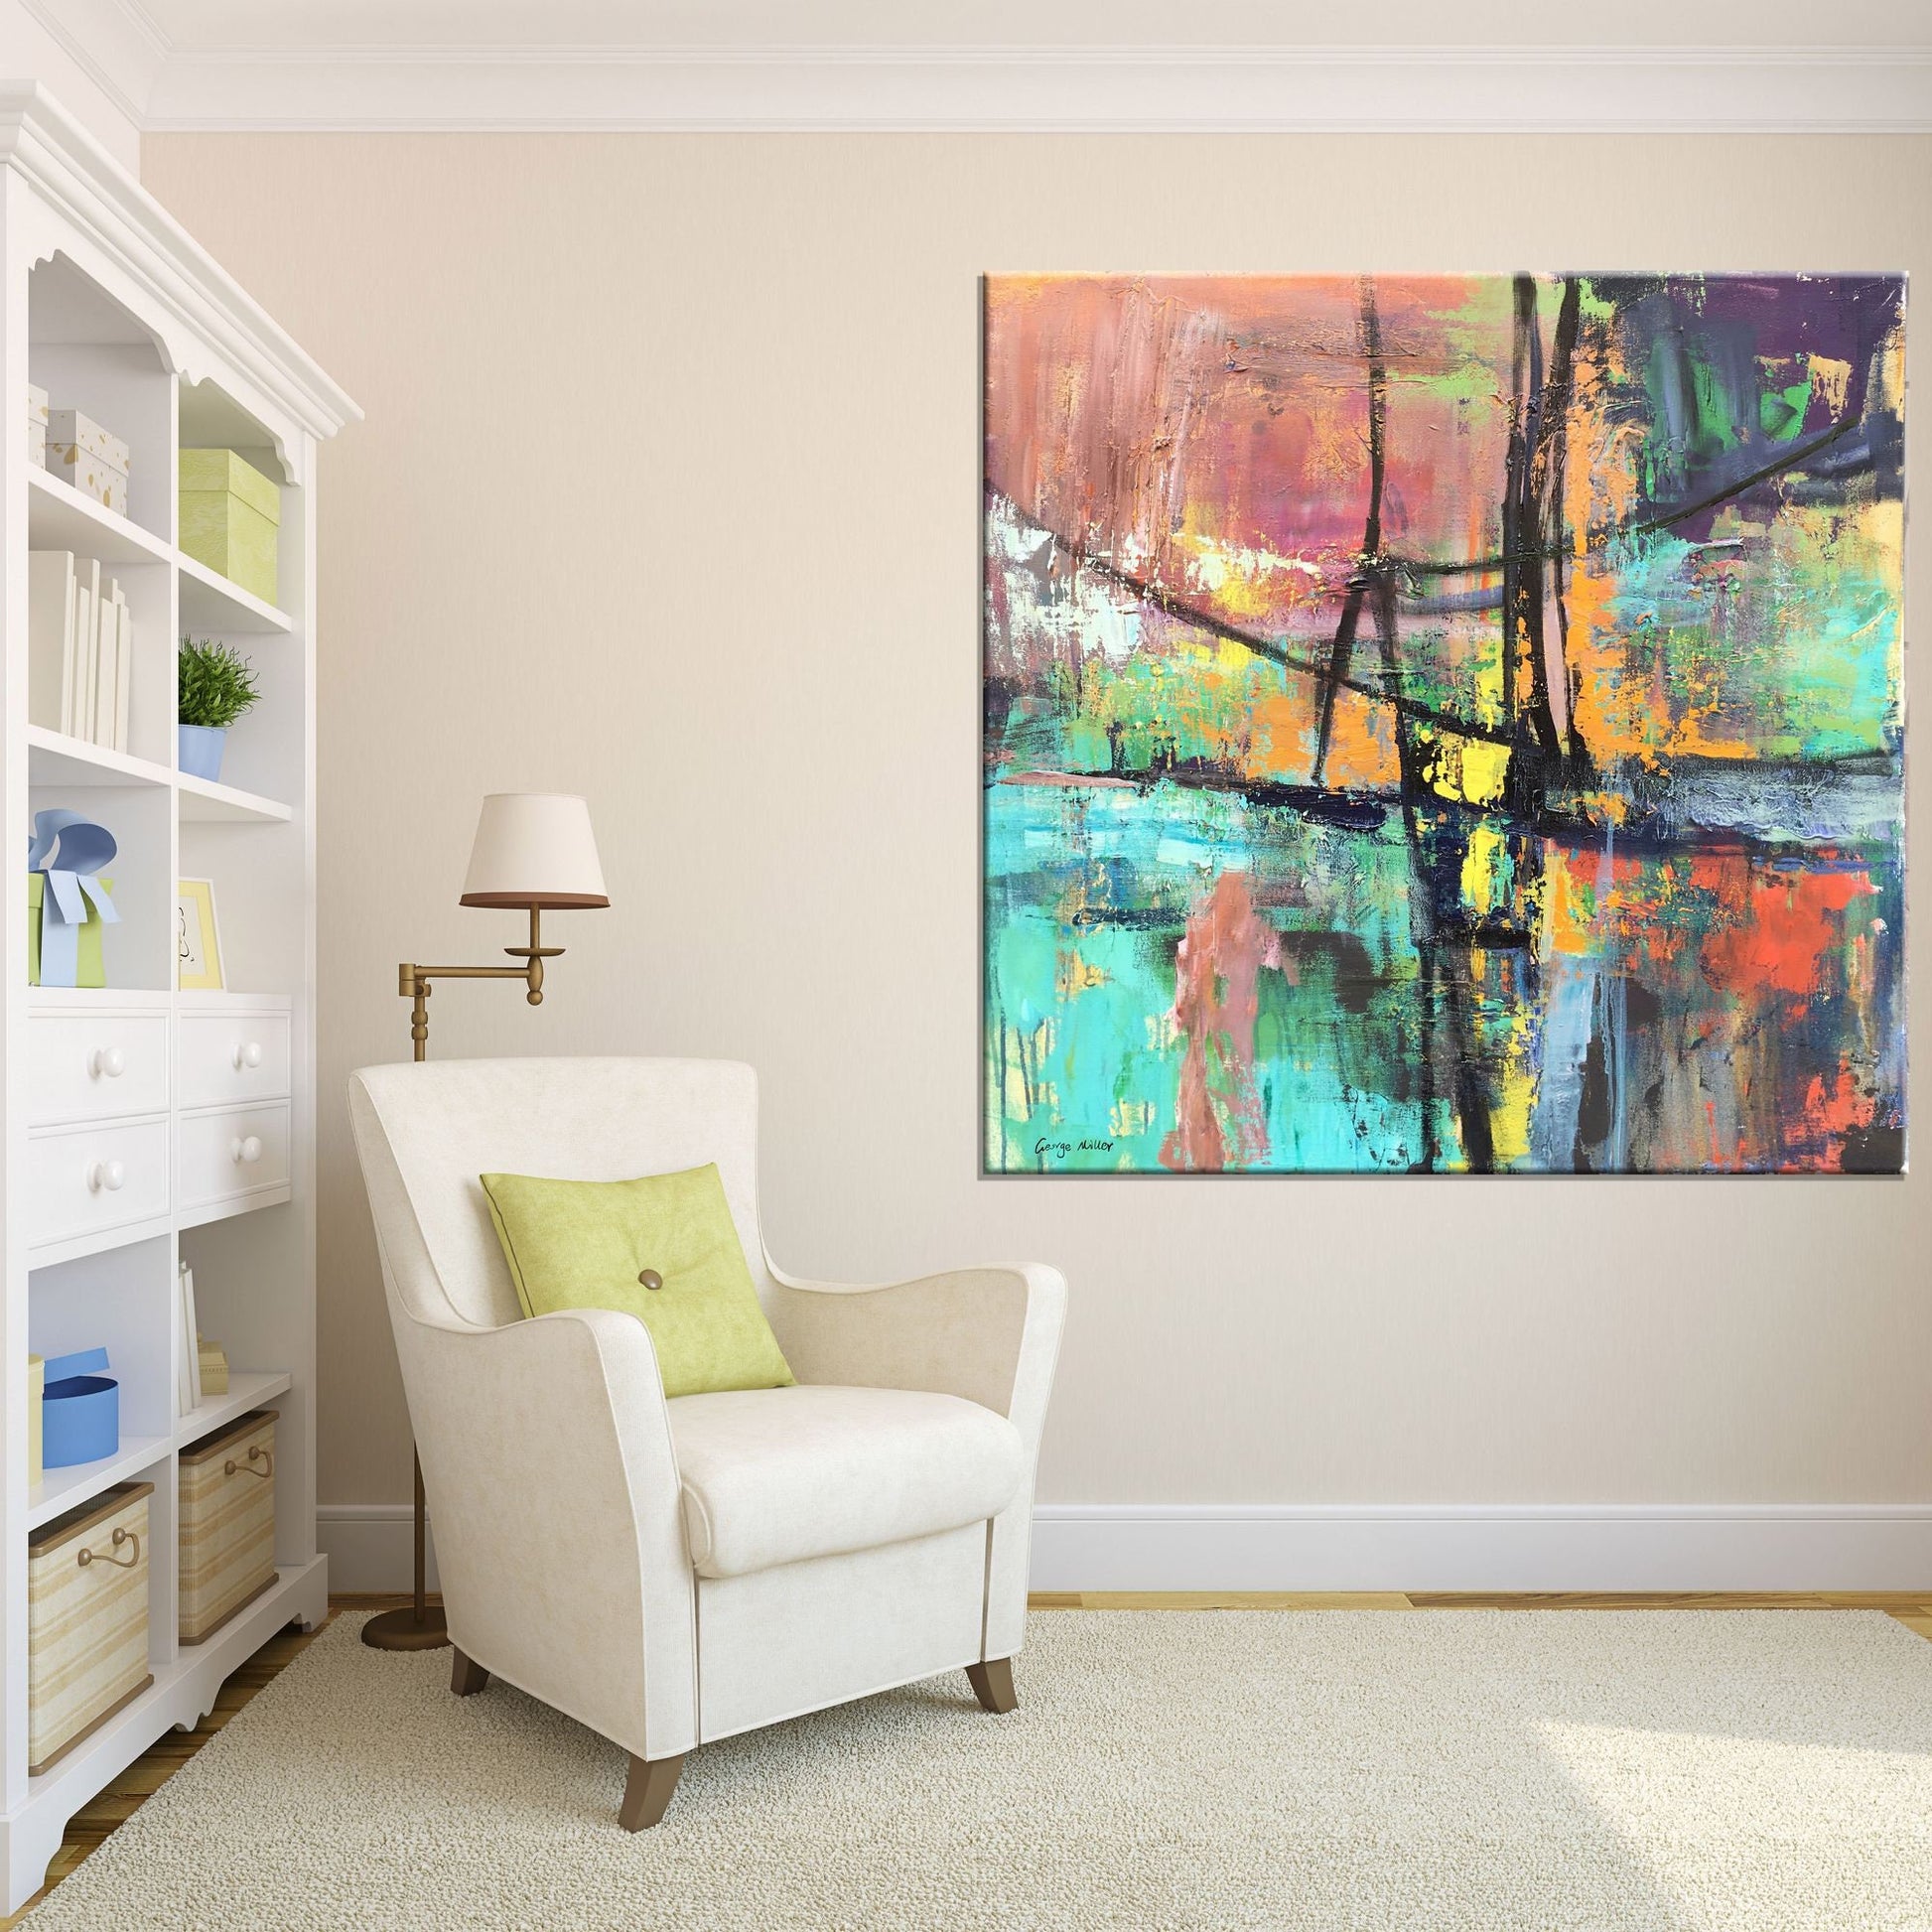 Abstract Painting, Canvas Painting, Large Canvas Art, Contemporary Art, Original Abstract Art, Extra Large Wall Art, Painting Abstract, Oil